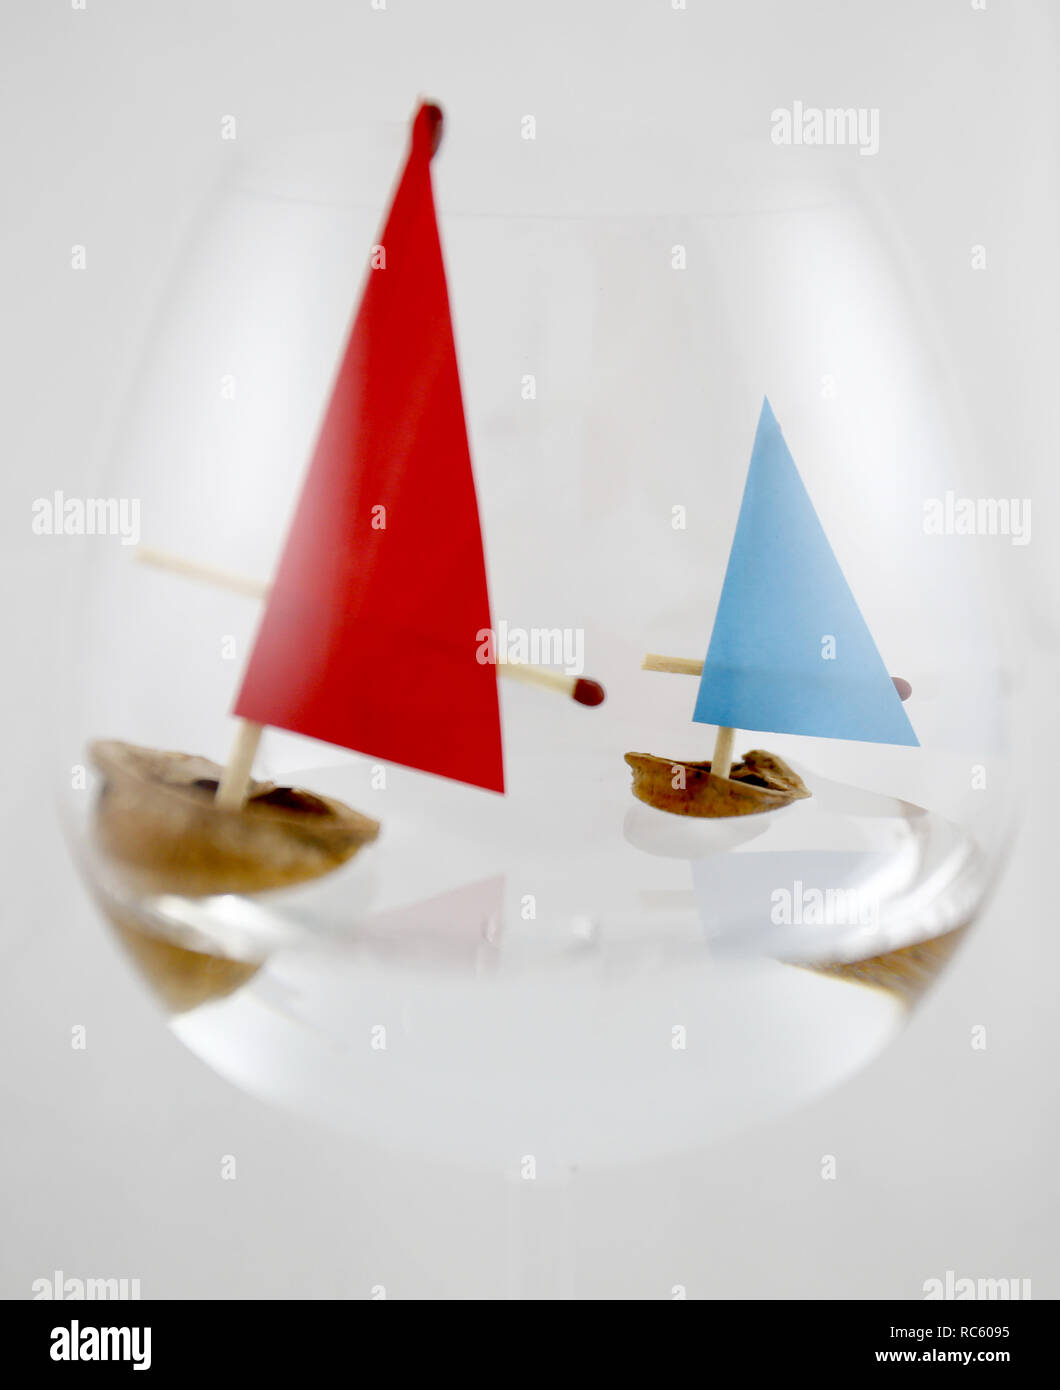 Marbles and ships from nuts Stock Photo